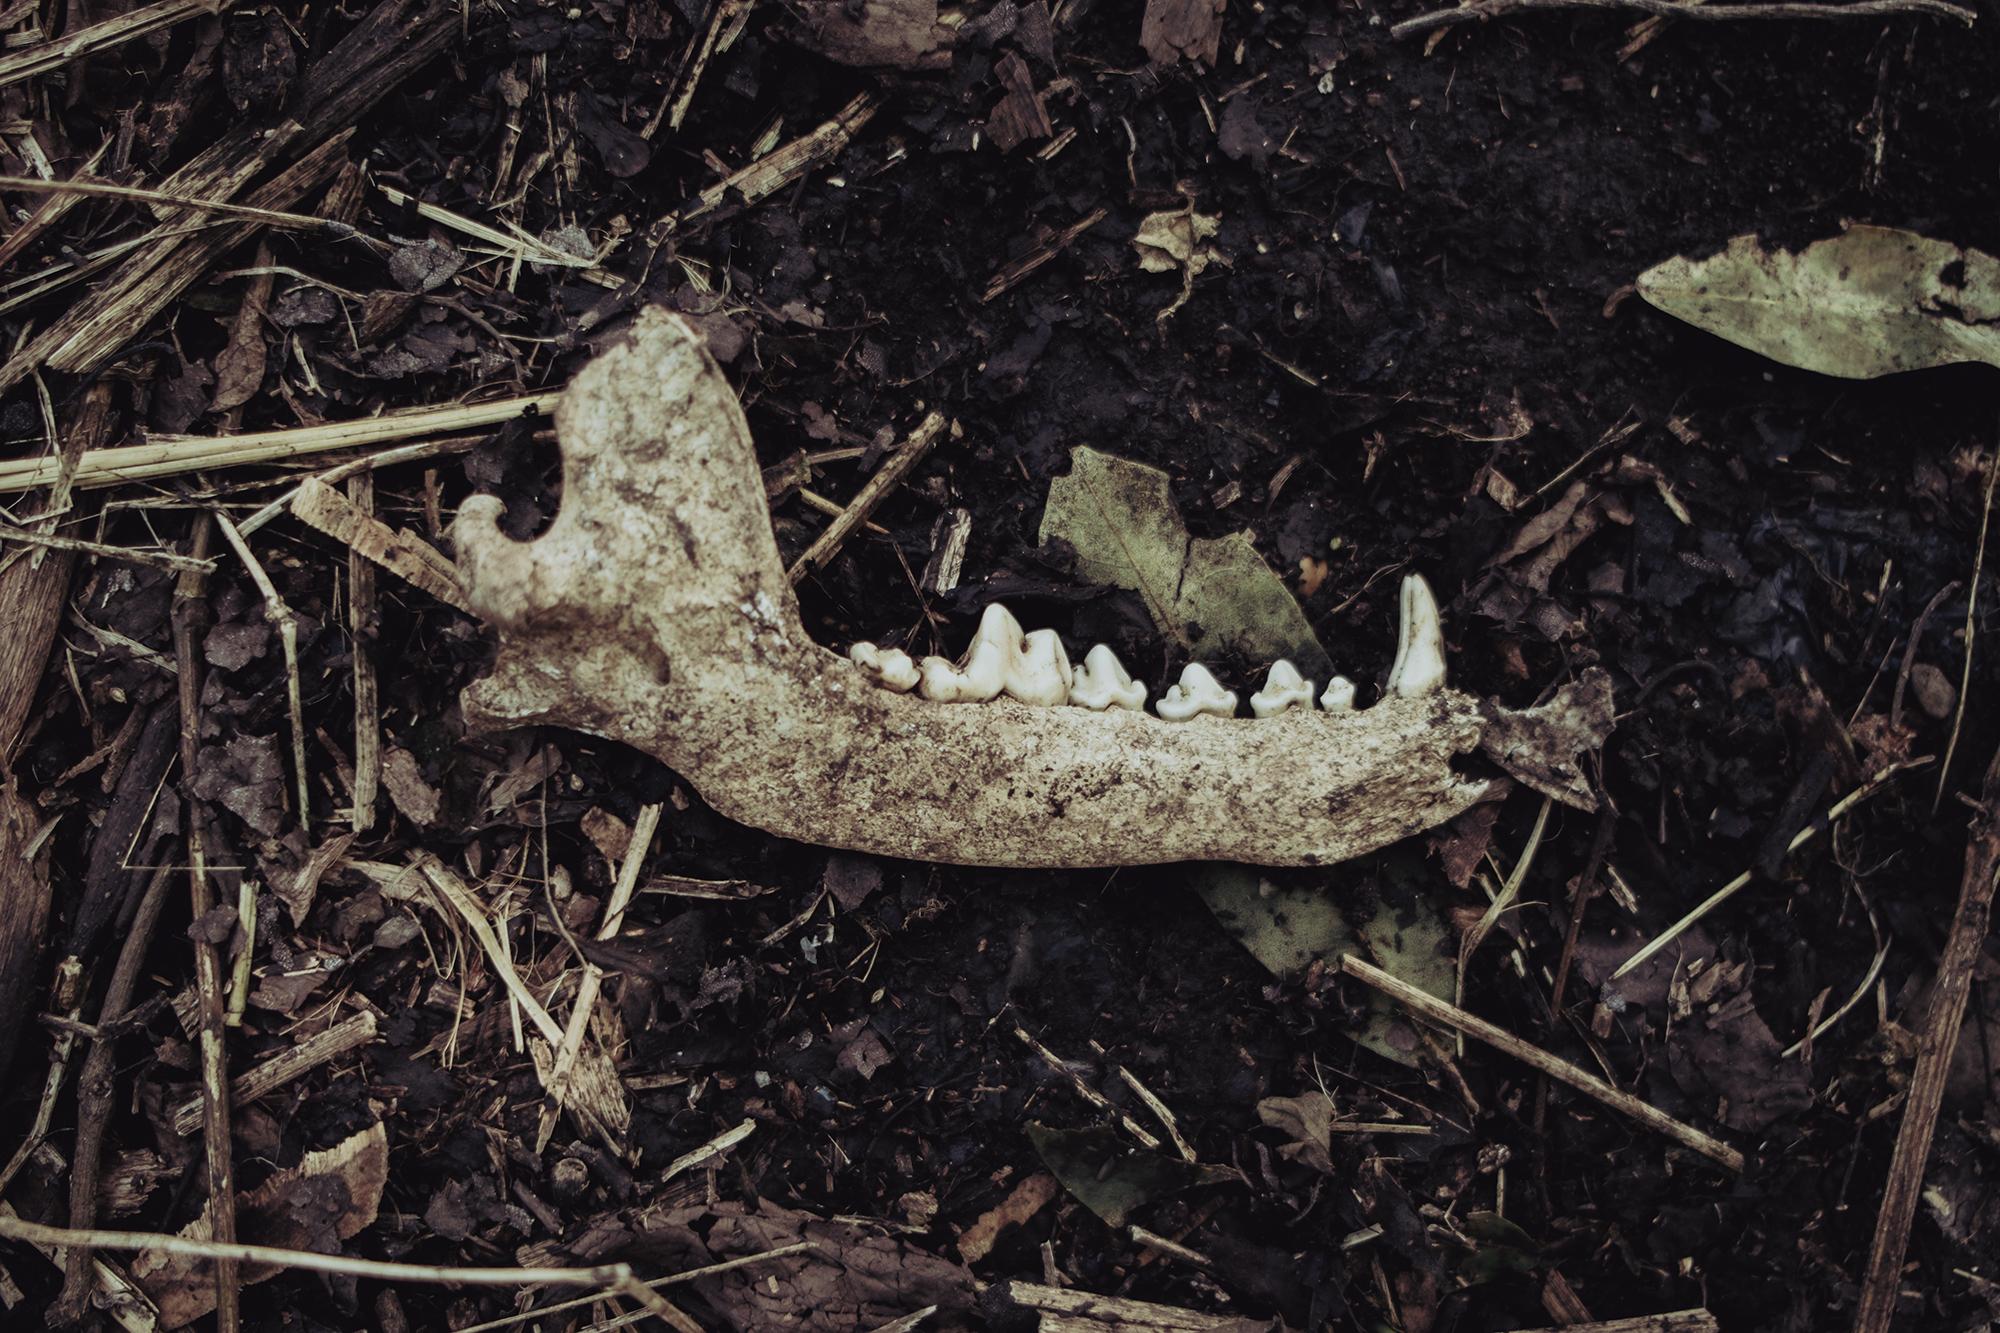 The area occupied by the 100 families was formerly an informal landfill where people from the city left their waste. The trash is still visible today along the outskirts of the community. Nestled between the tents was this jawbone. 